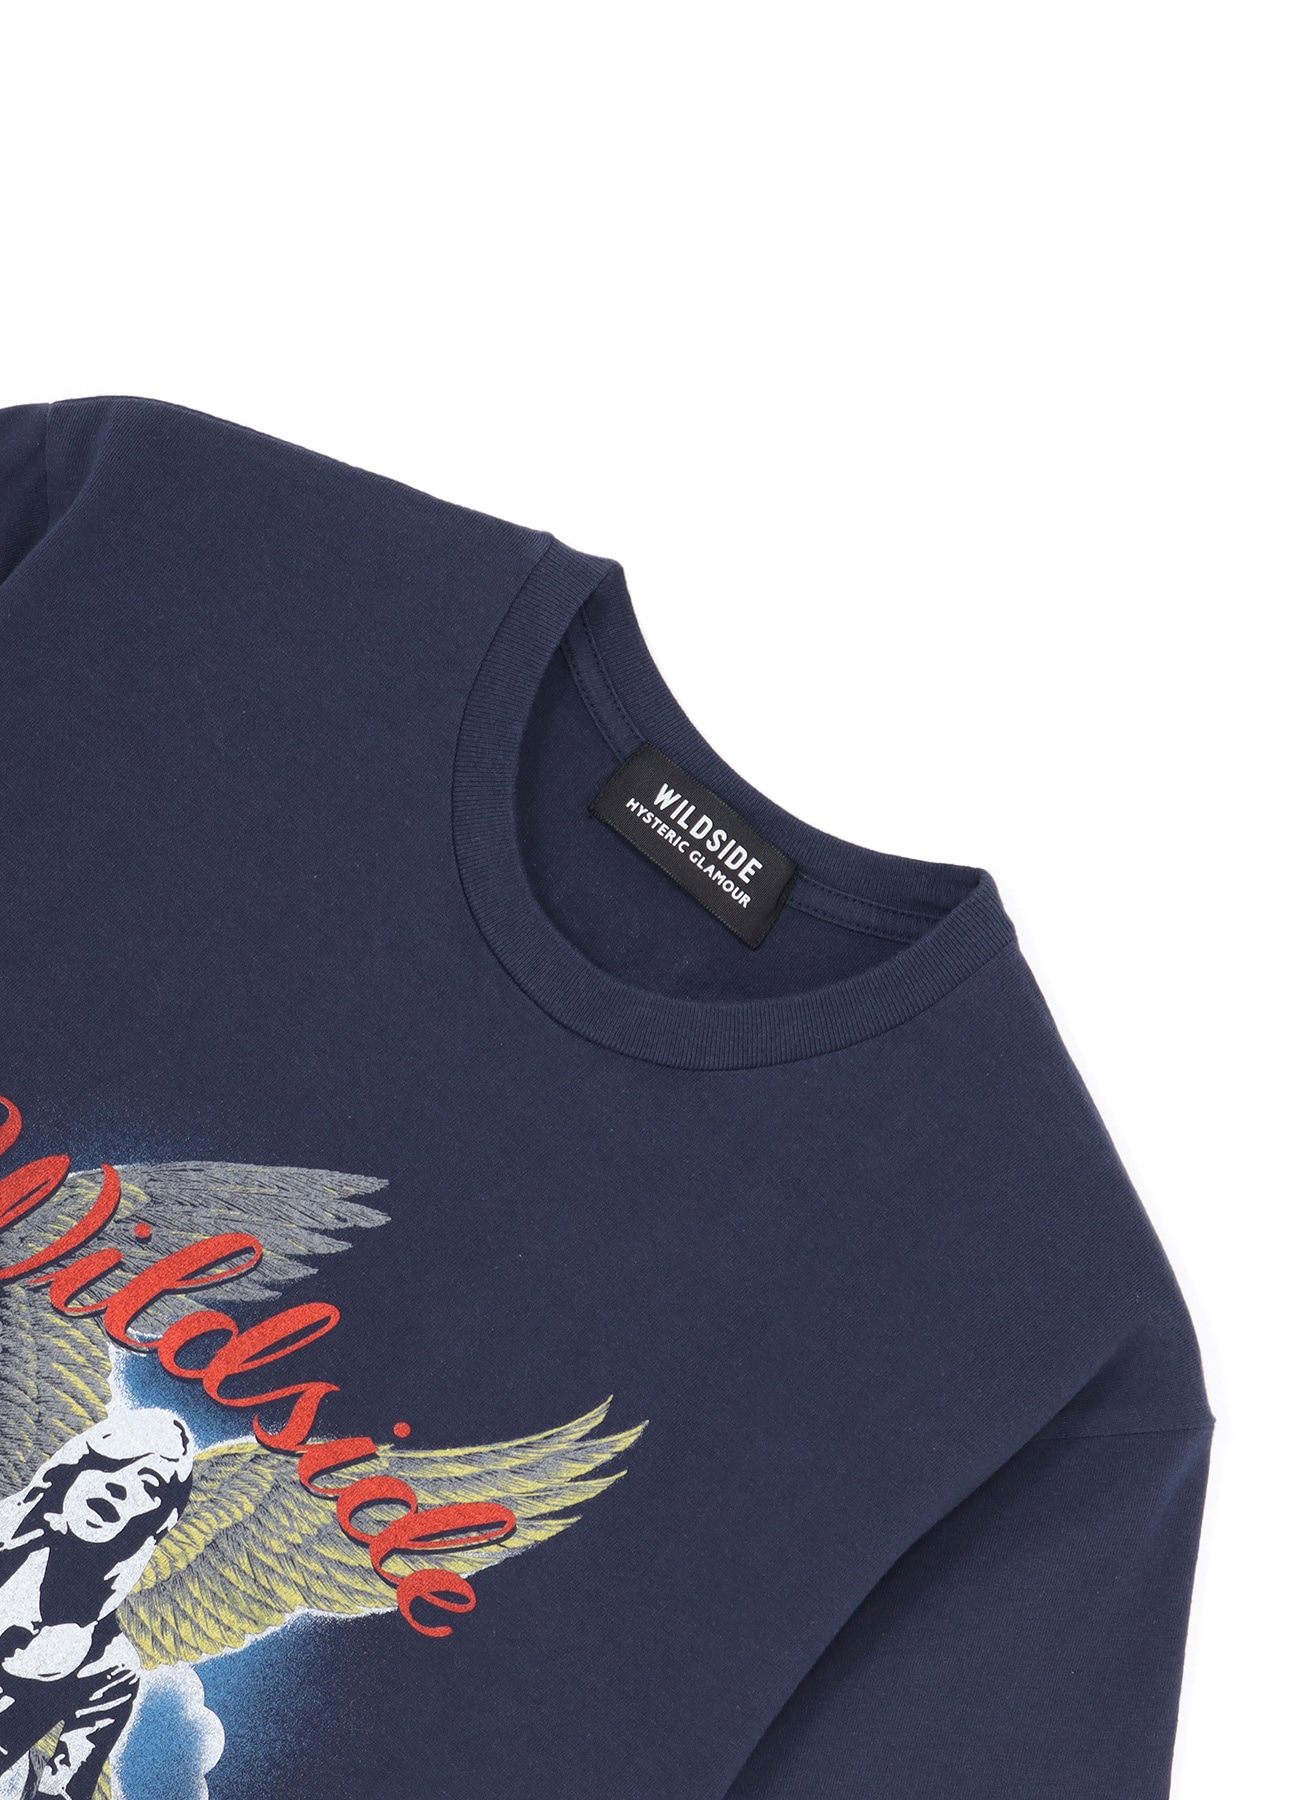 WILDSIDE × HYSTERIC GLAMOUR T-Shirt(S NAVY): HYSTERIC GLAMOUR ...